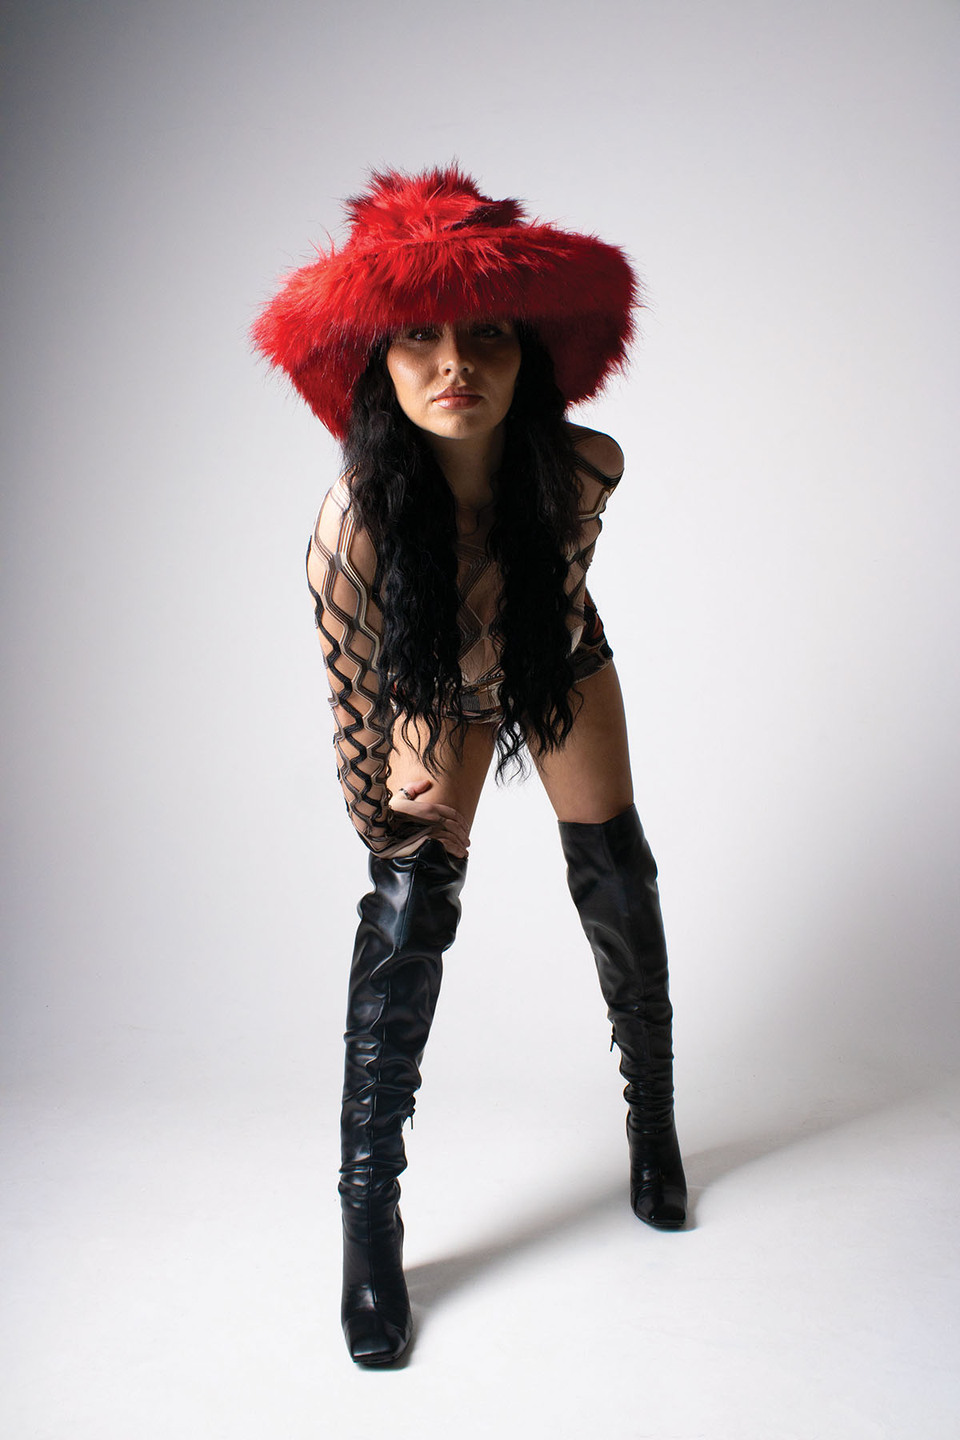 Woman leans forward in over the knee leather boots, large red fur hat, leather underwear and curving lattice-like top